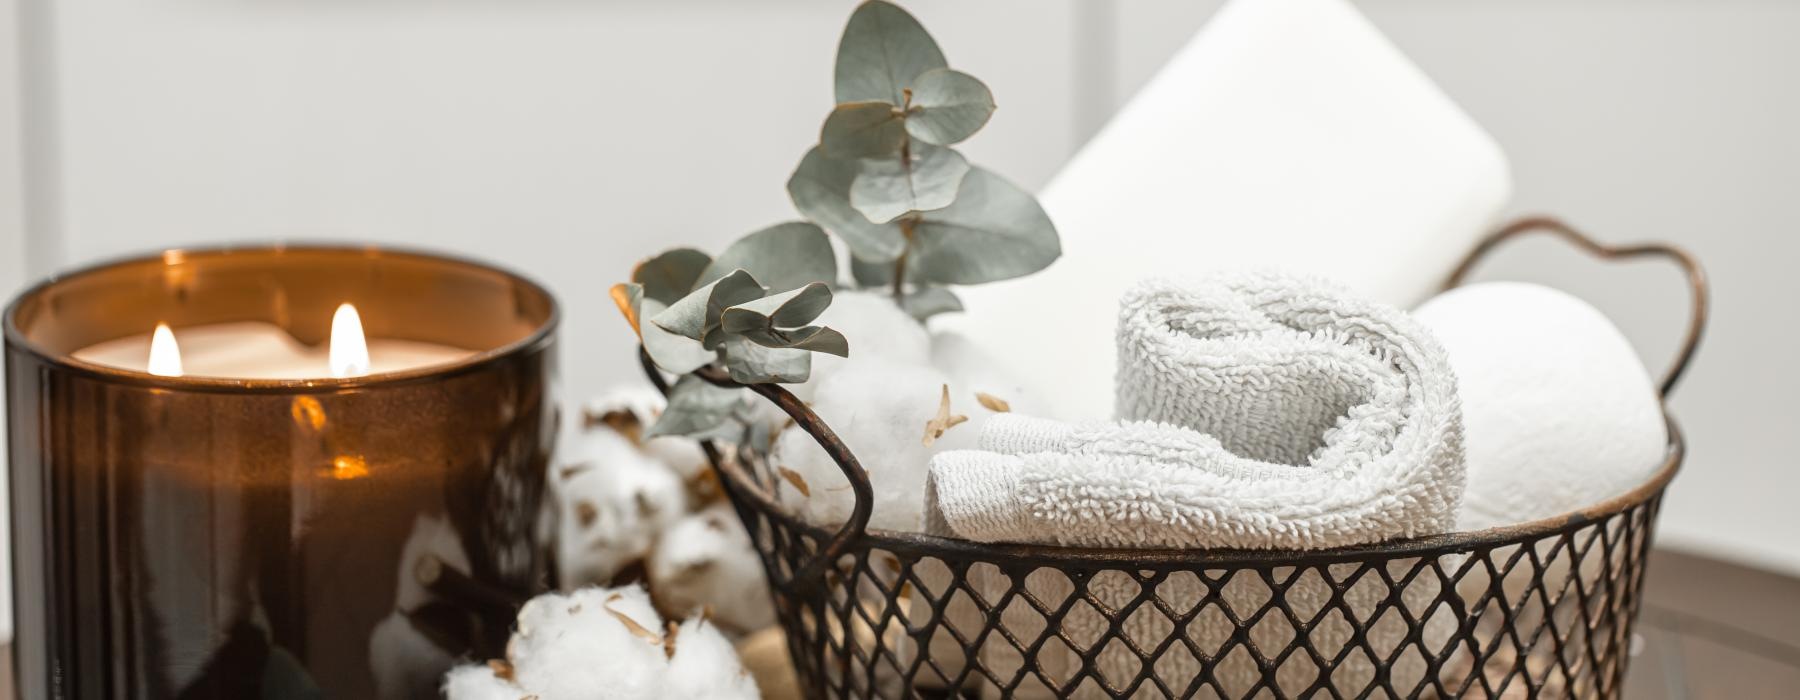 a candle beside cotton and a basket of towels